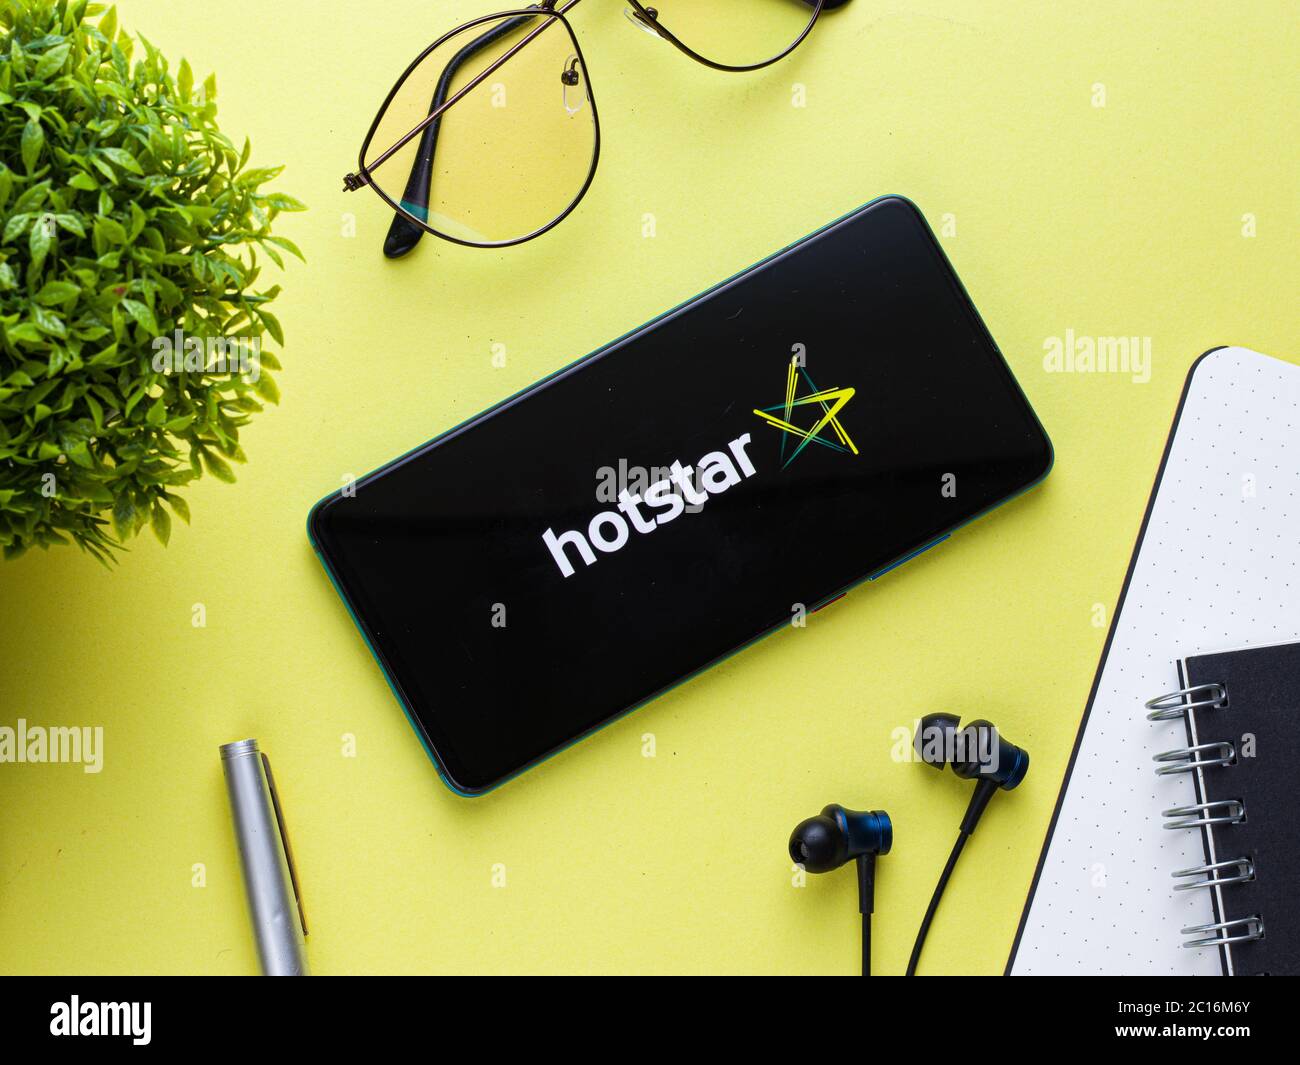 Hotstar Logo High Resolution Stock Photography And Images Alamy